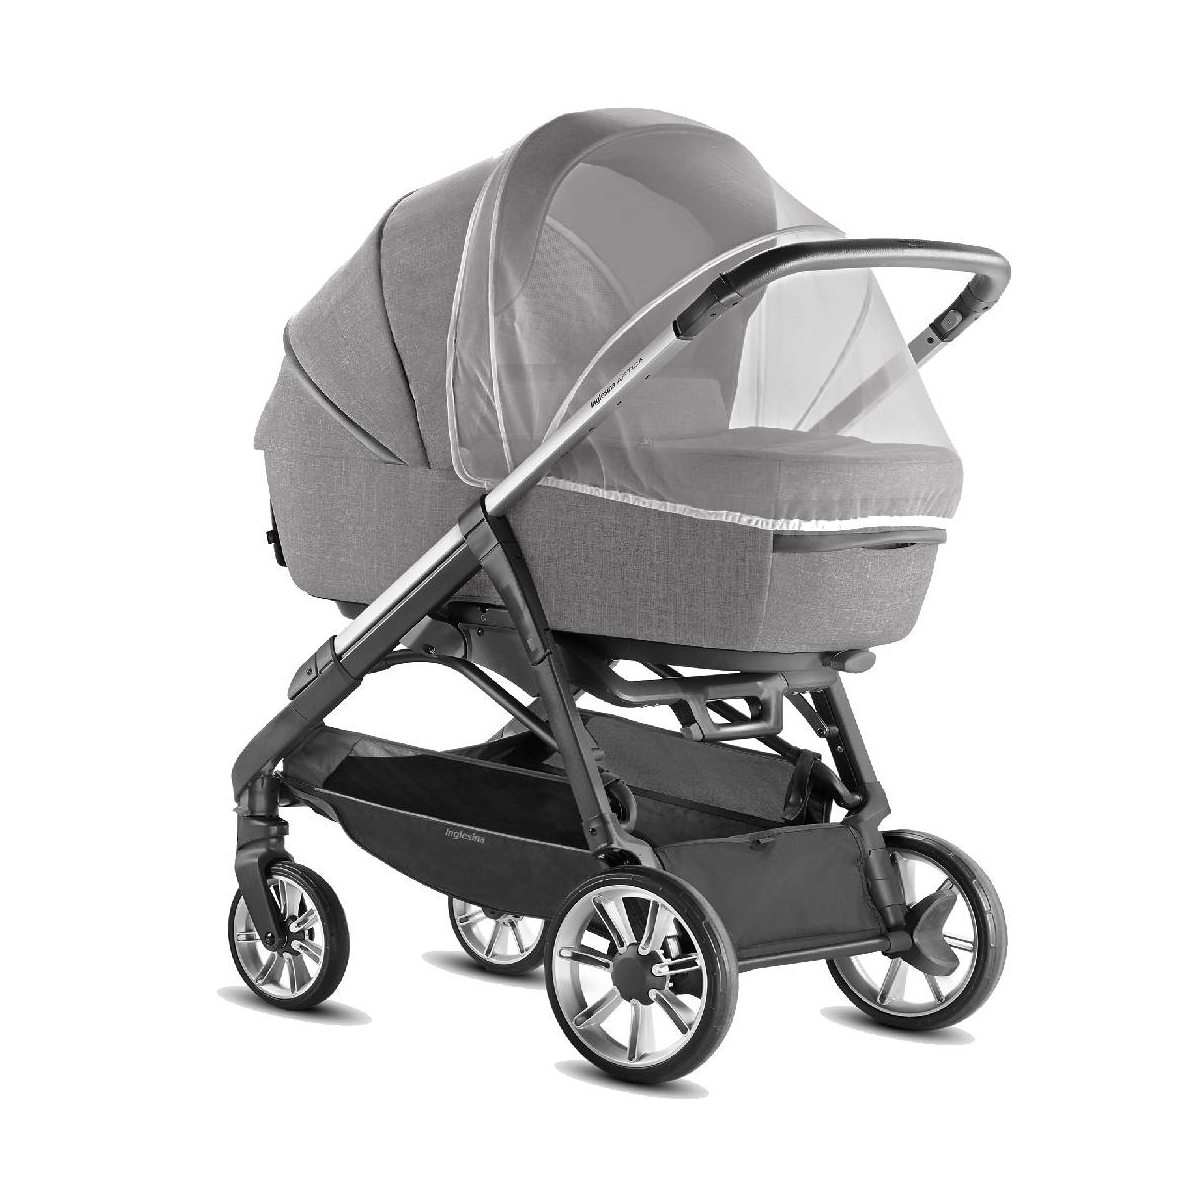 Inglesina Mosquito Net for Carrycot